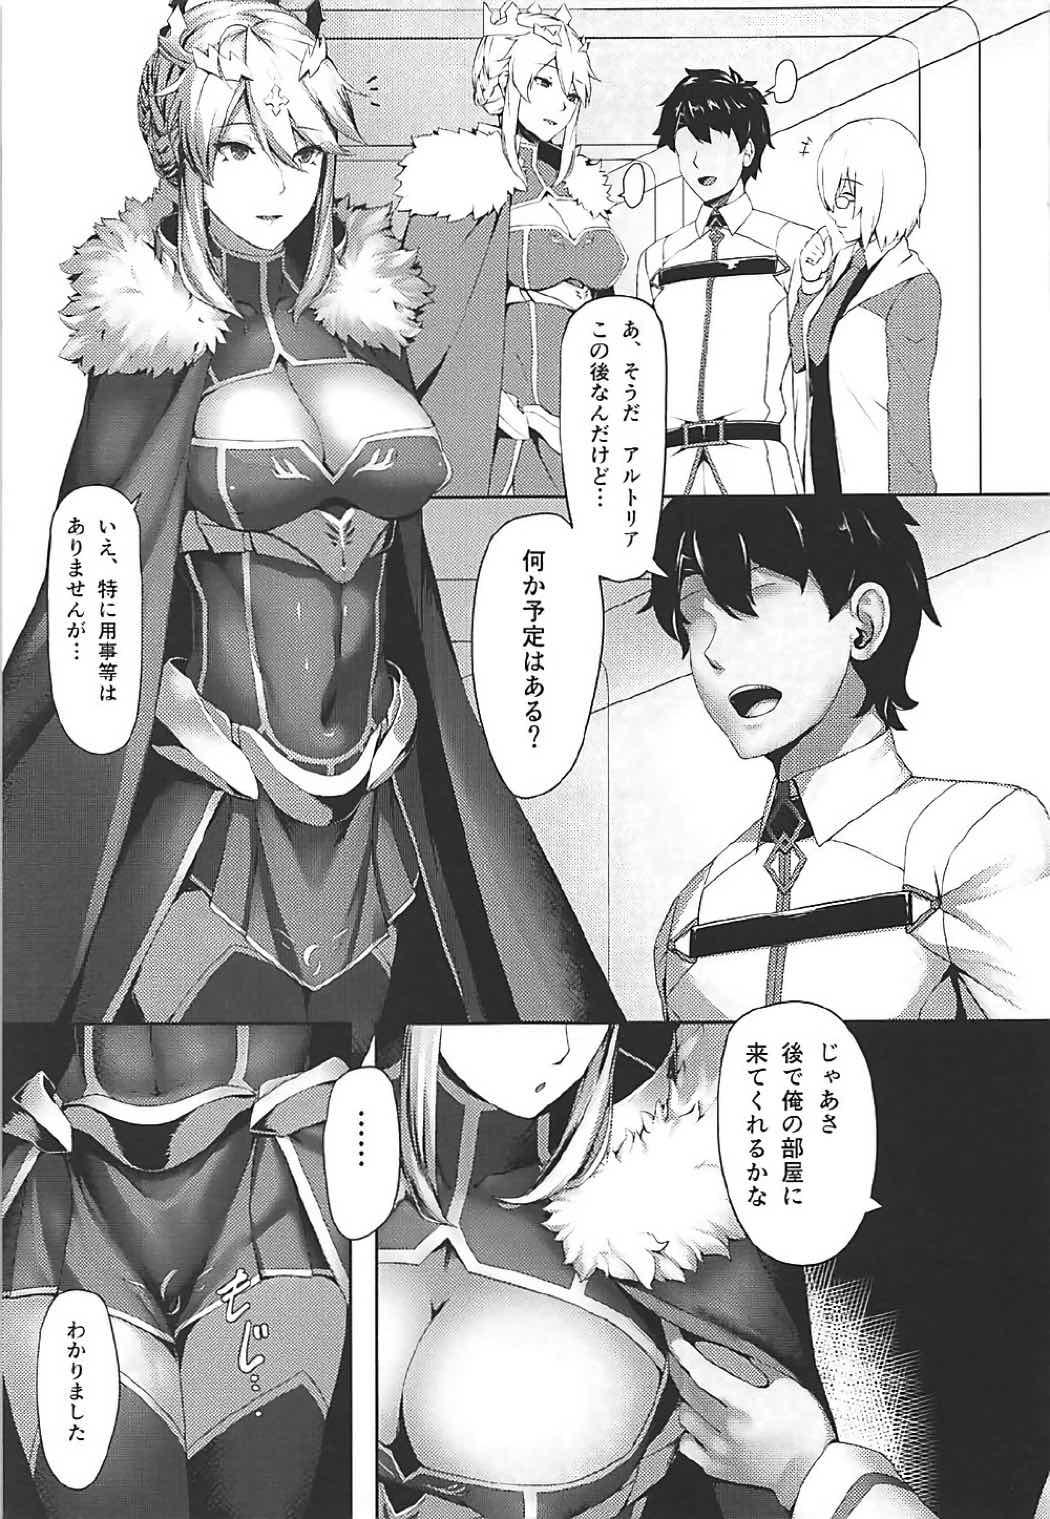 Mujer What do you like? - Fate grand order Telugu - Page 2